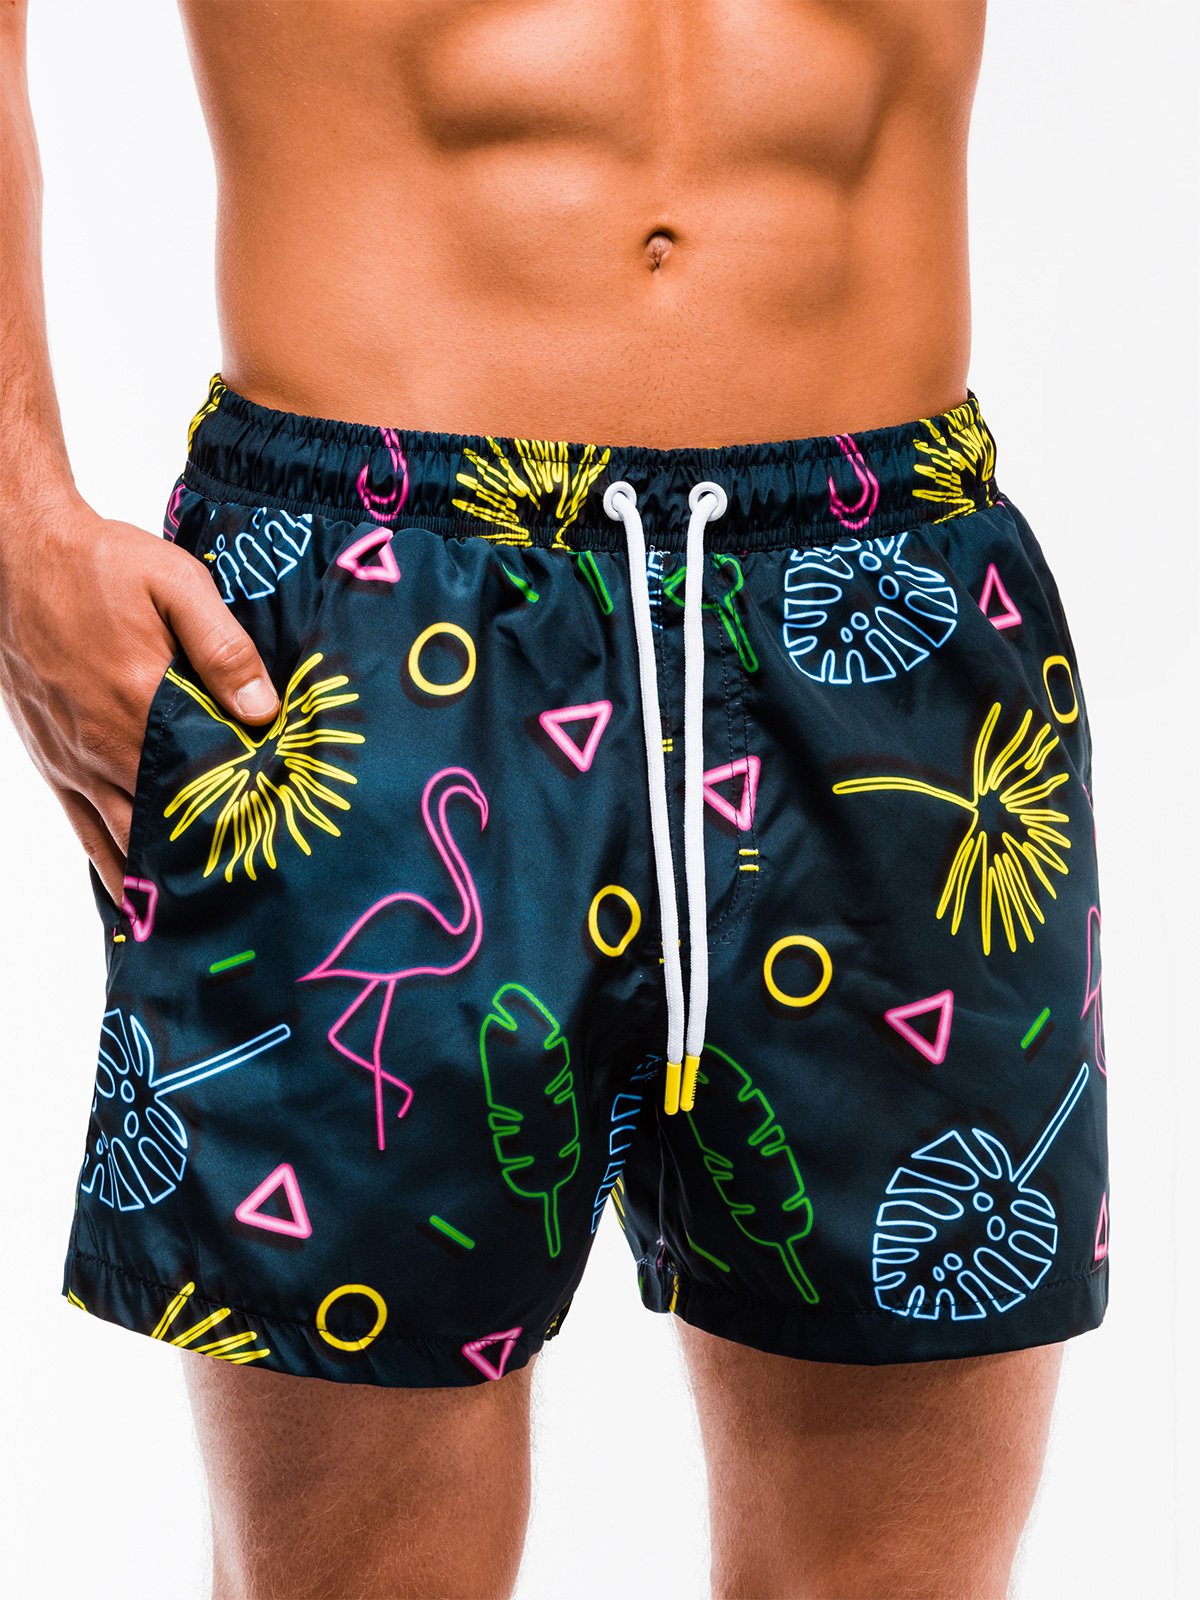 Men's swimming shorts W145 - navy | MODONE wholesale - Clothing For Men